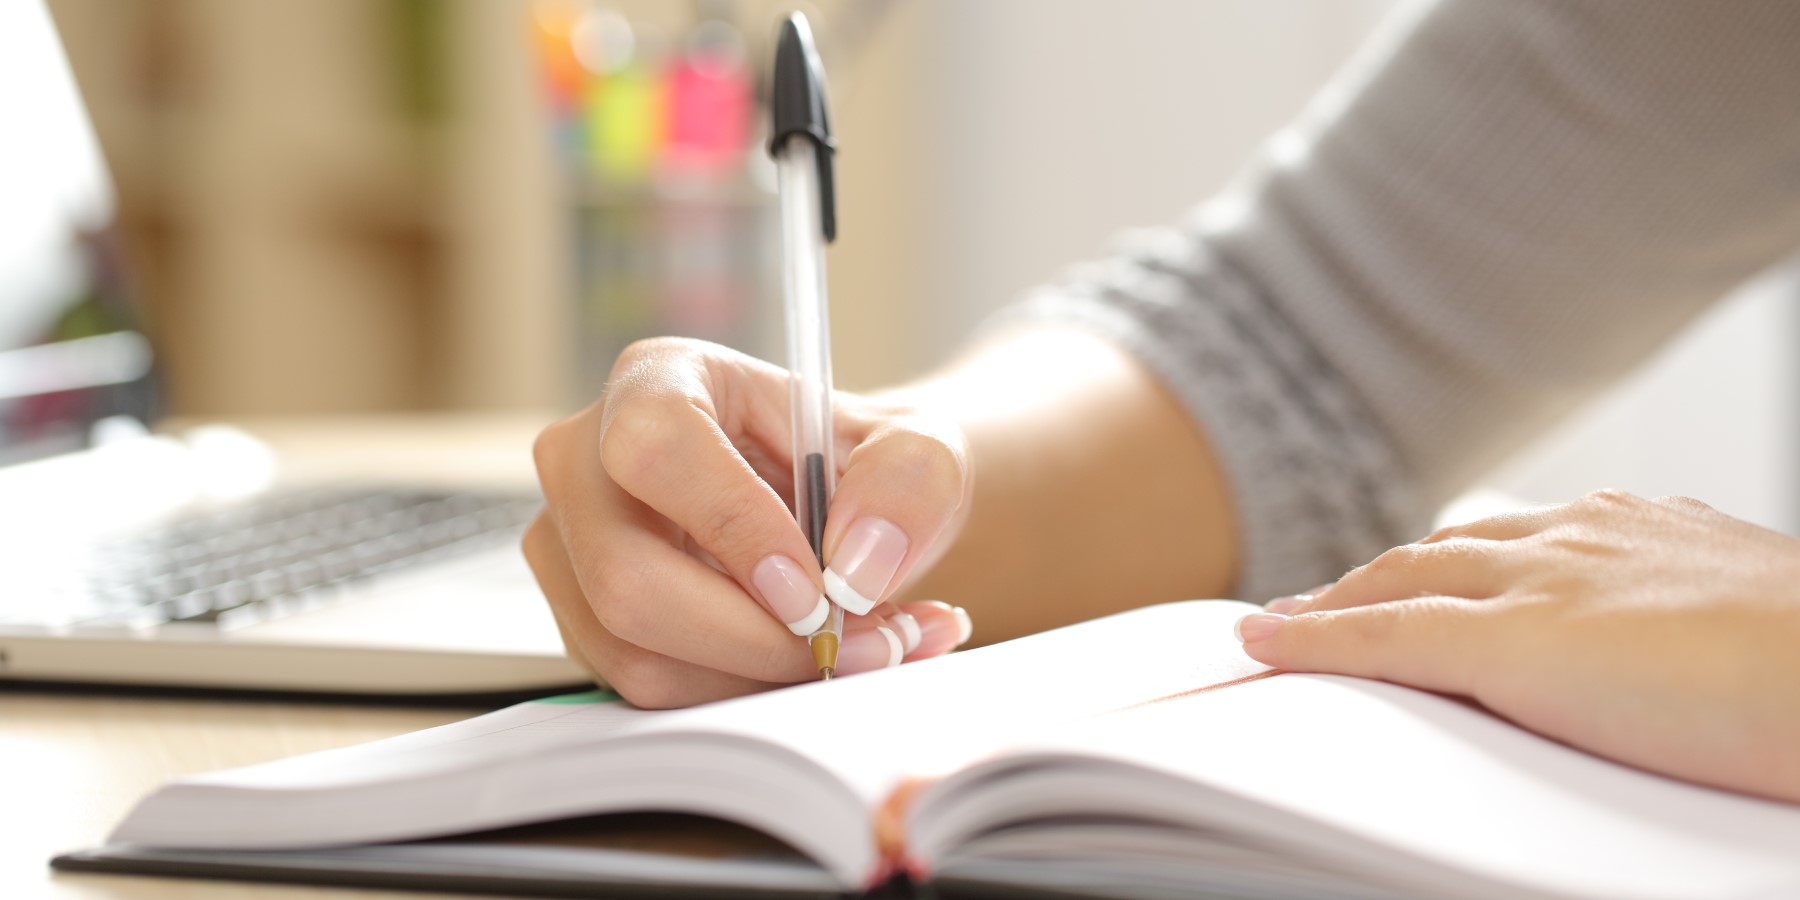 5 perfect tips to writing your essay that makes your grade better